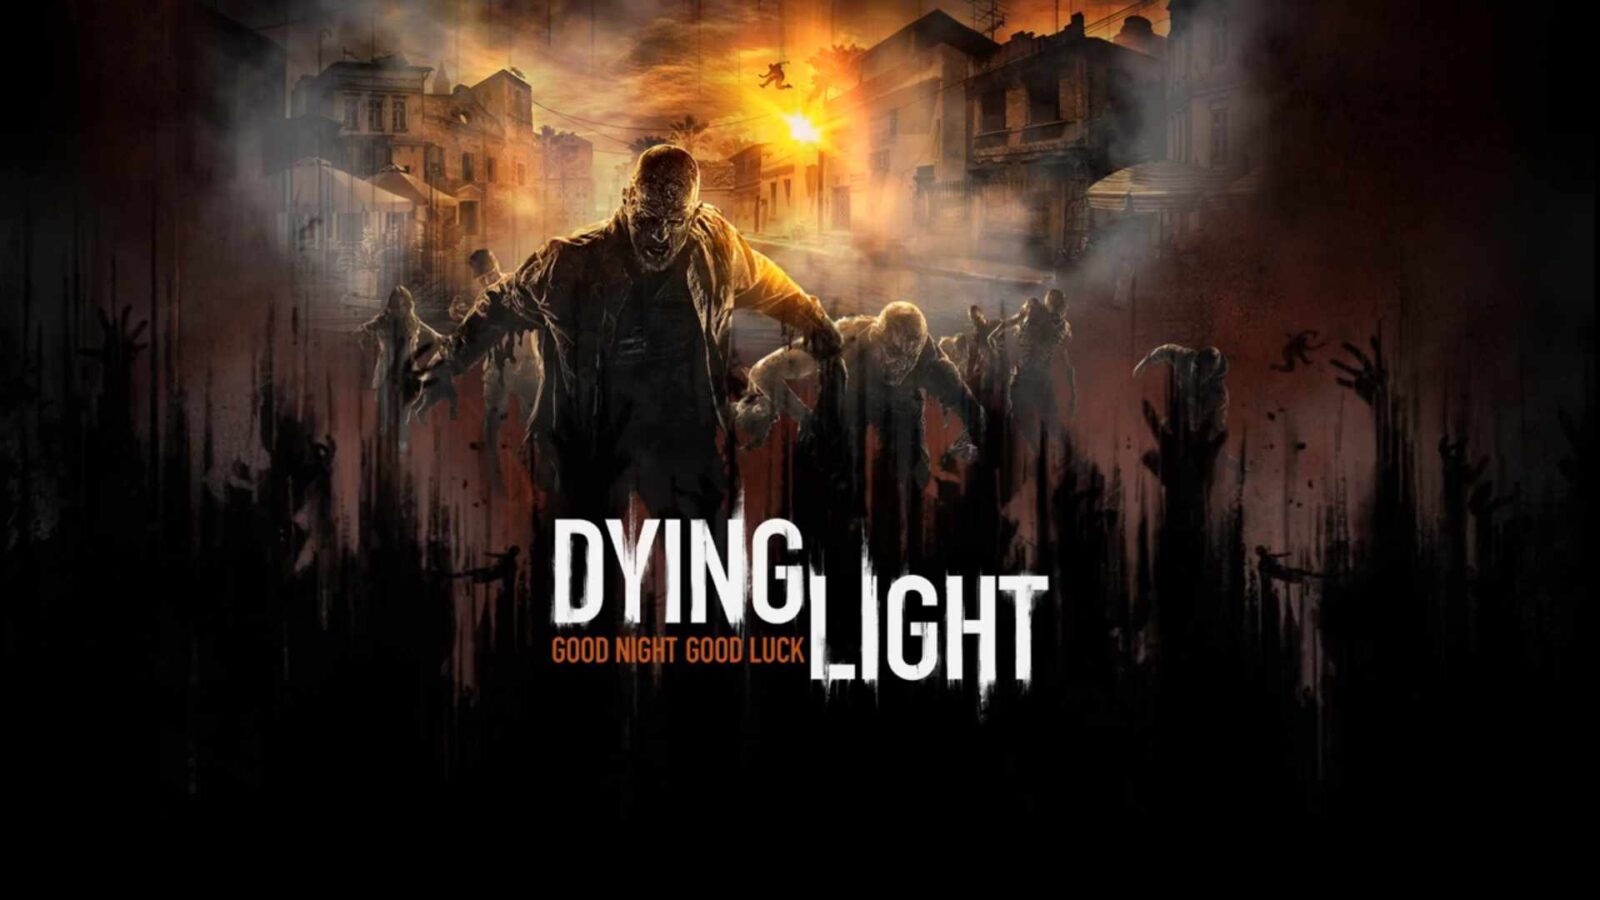 download free dying light game